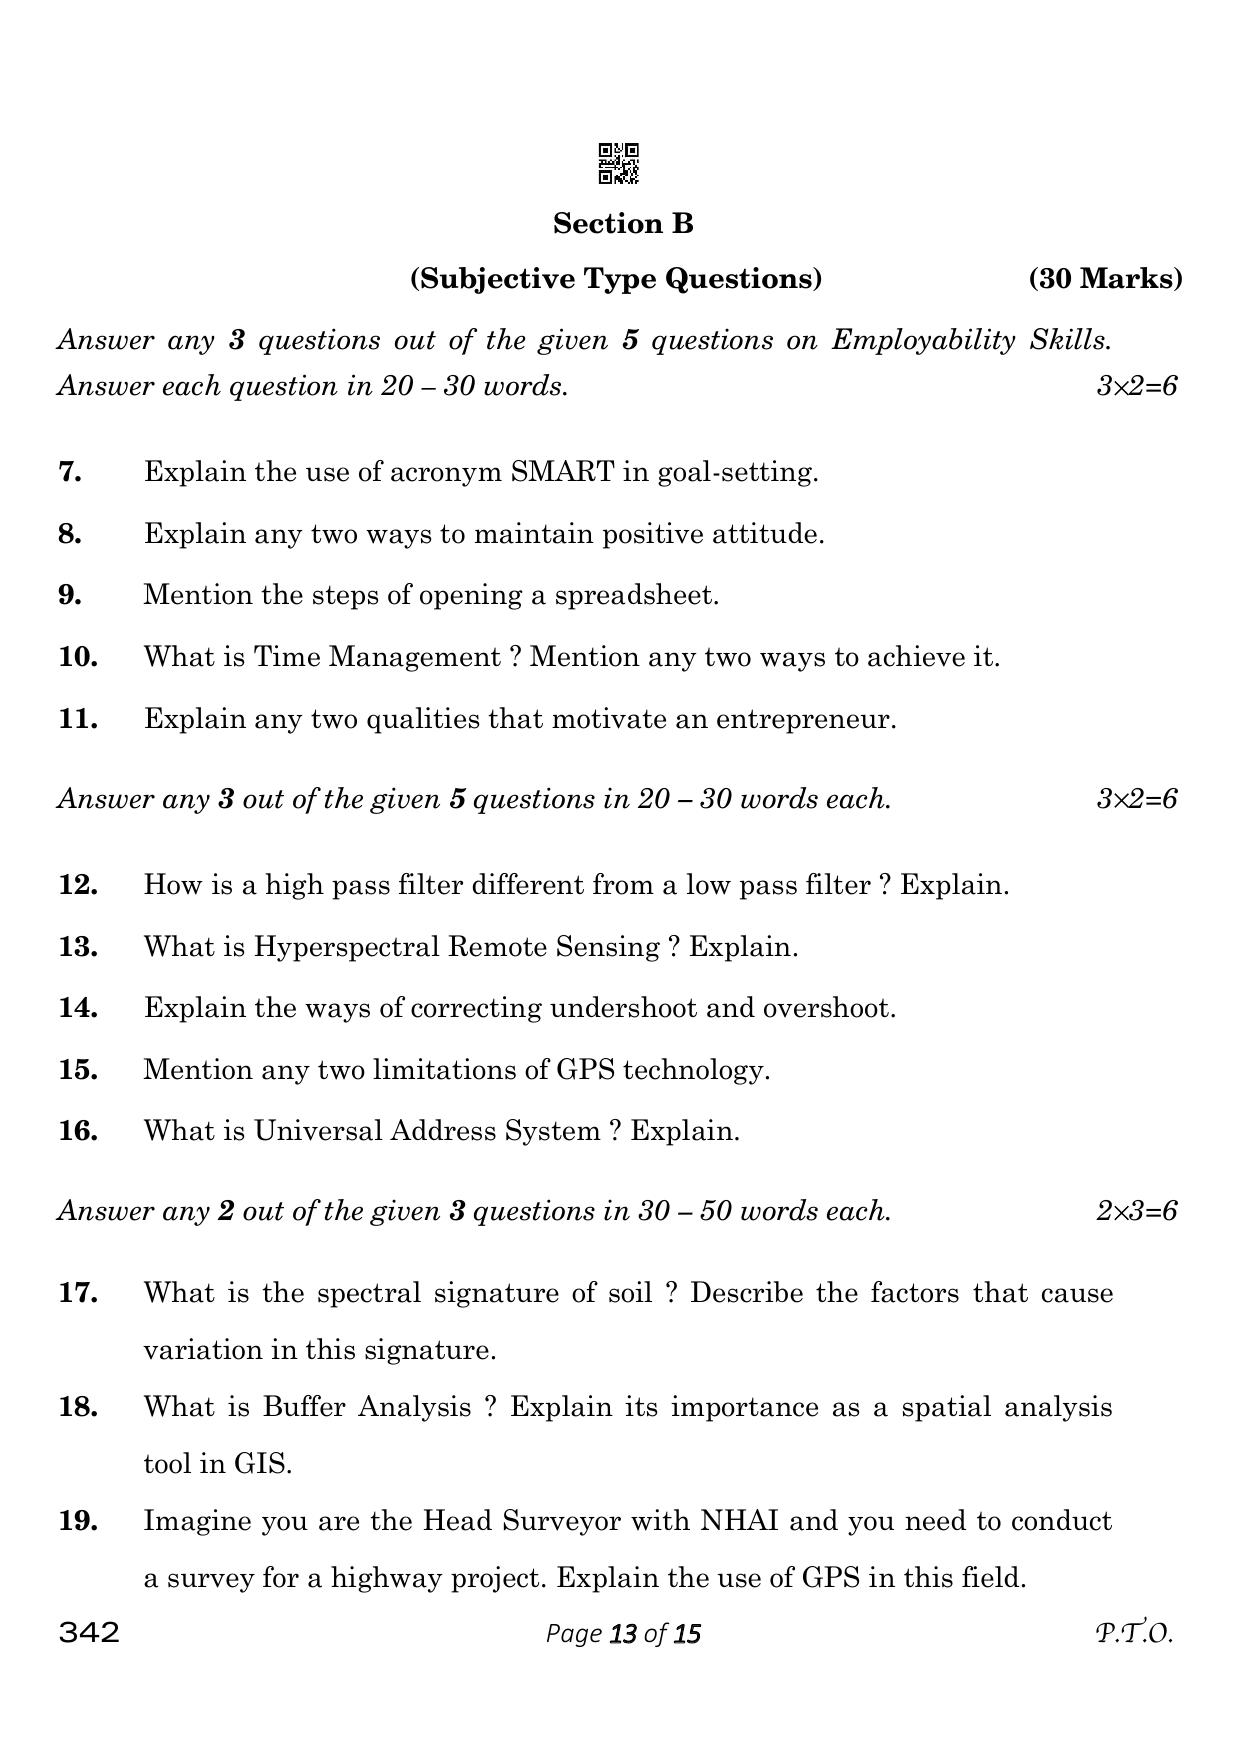 CBSE Class 12 342_Geospatial Technology 2023 Question Paper - Page 13